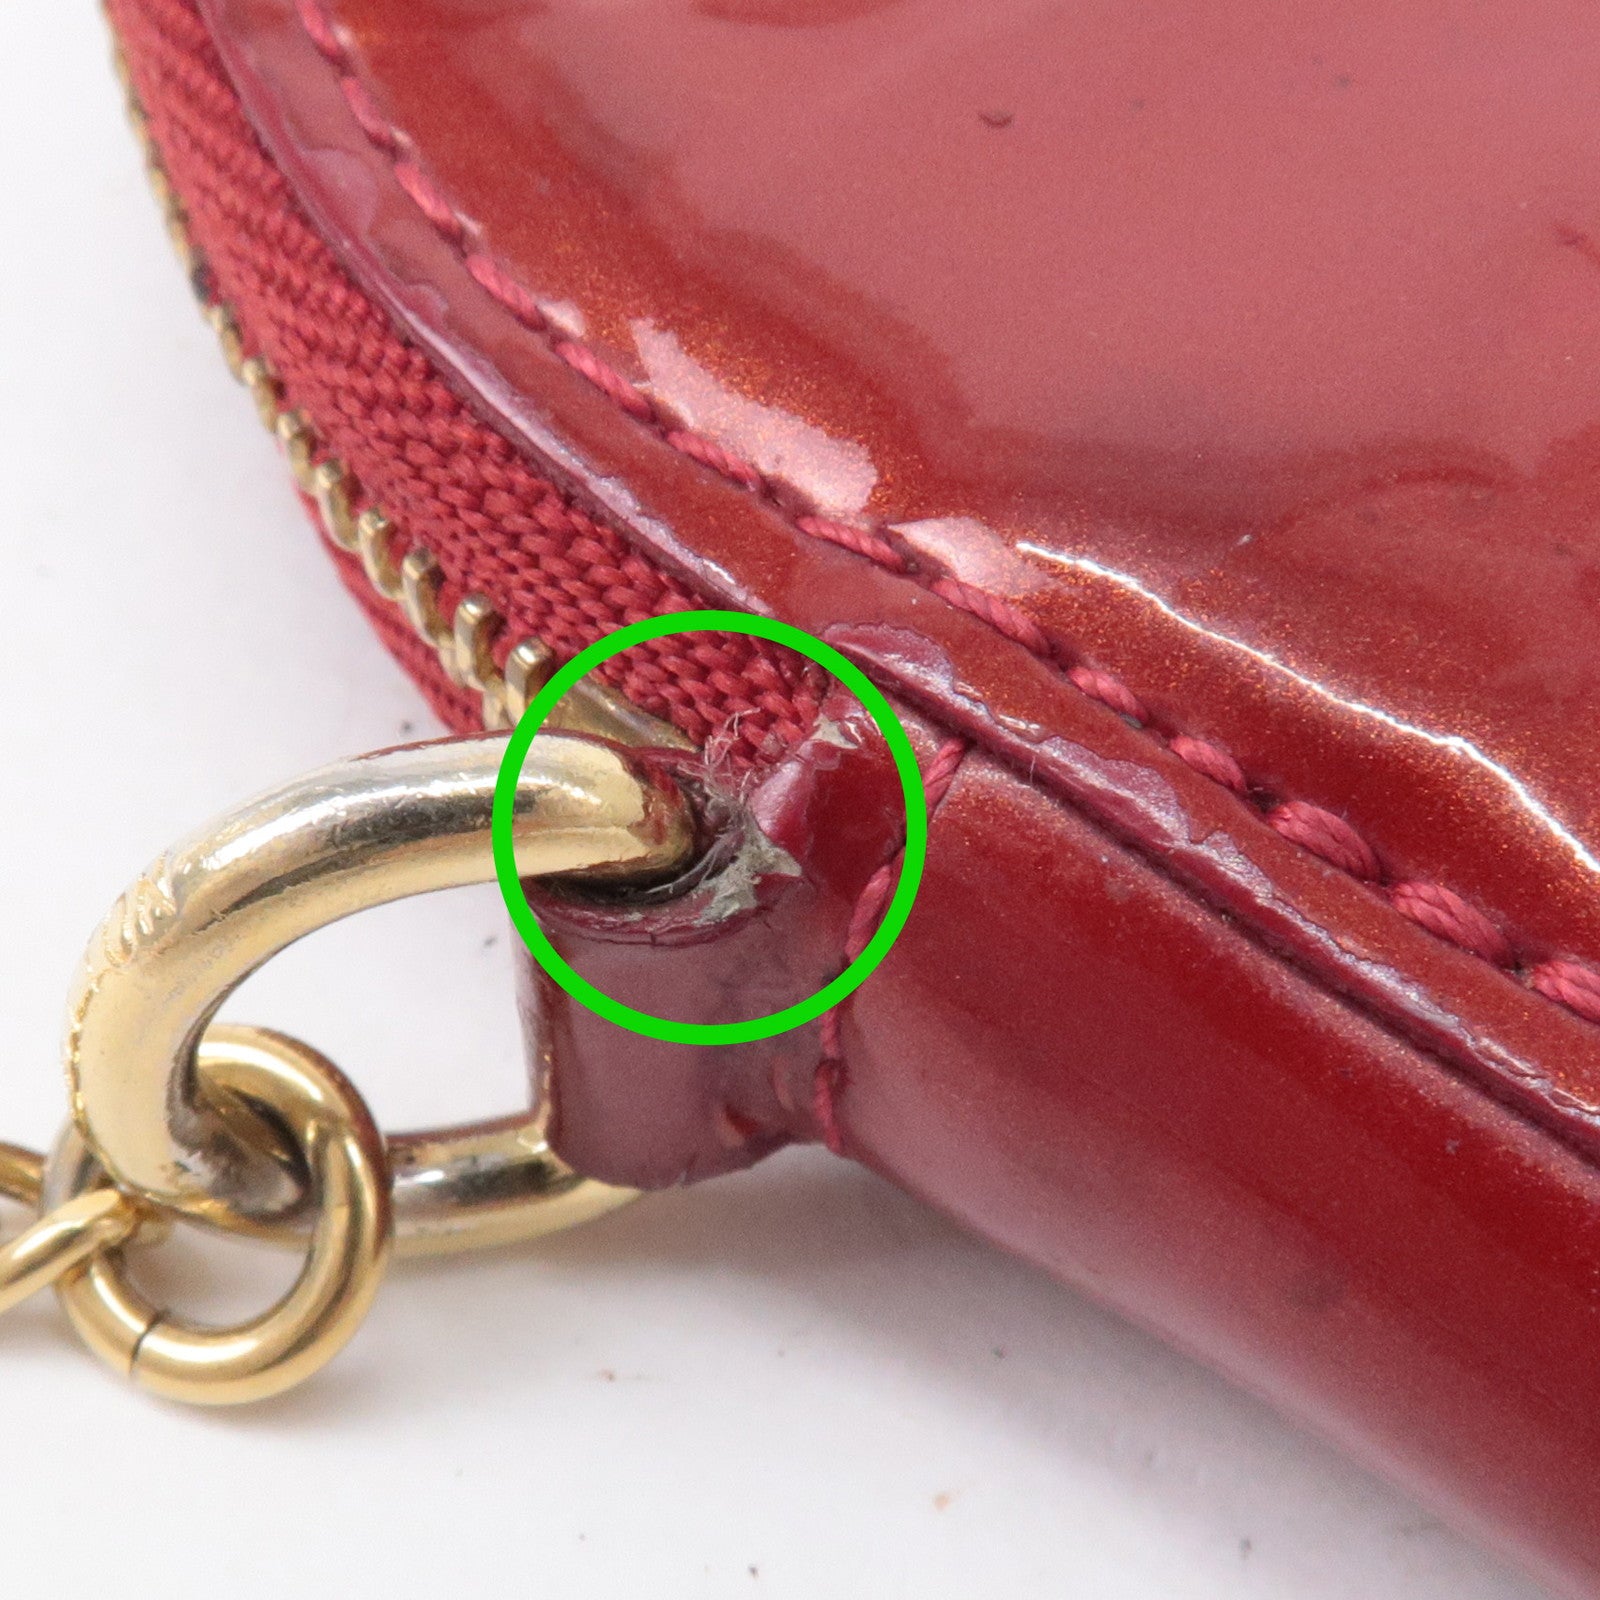 Louis Vuitton pink vernis leather keychain coin purse, Luxury